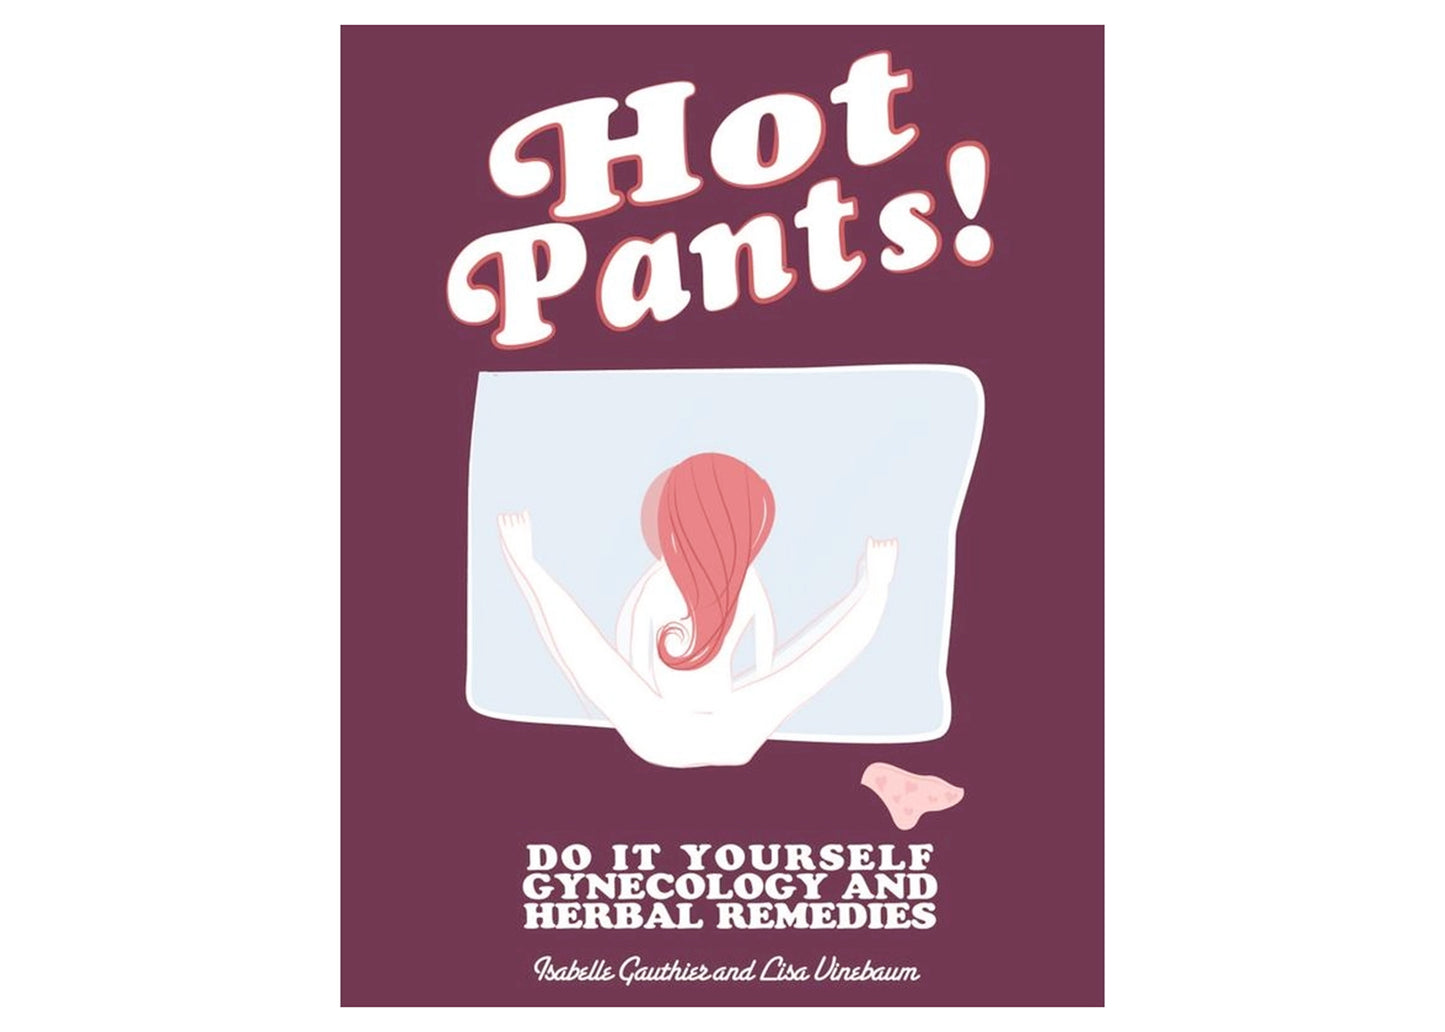 Hot Pants: Do It Yourself Gynecology Book